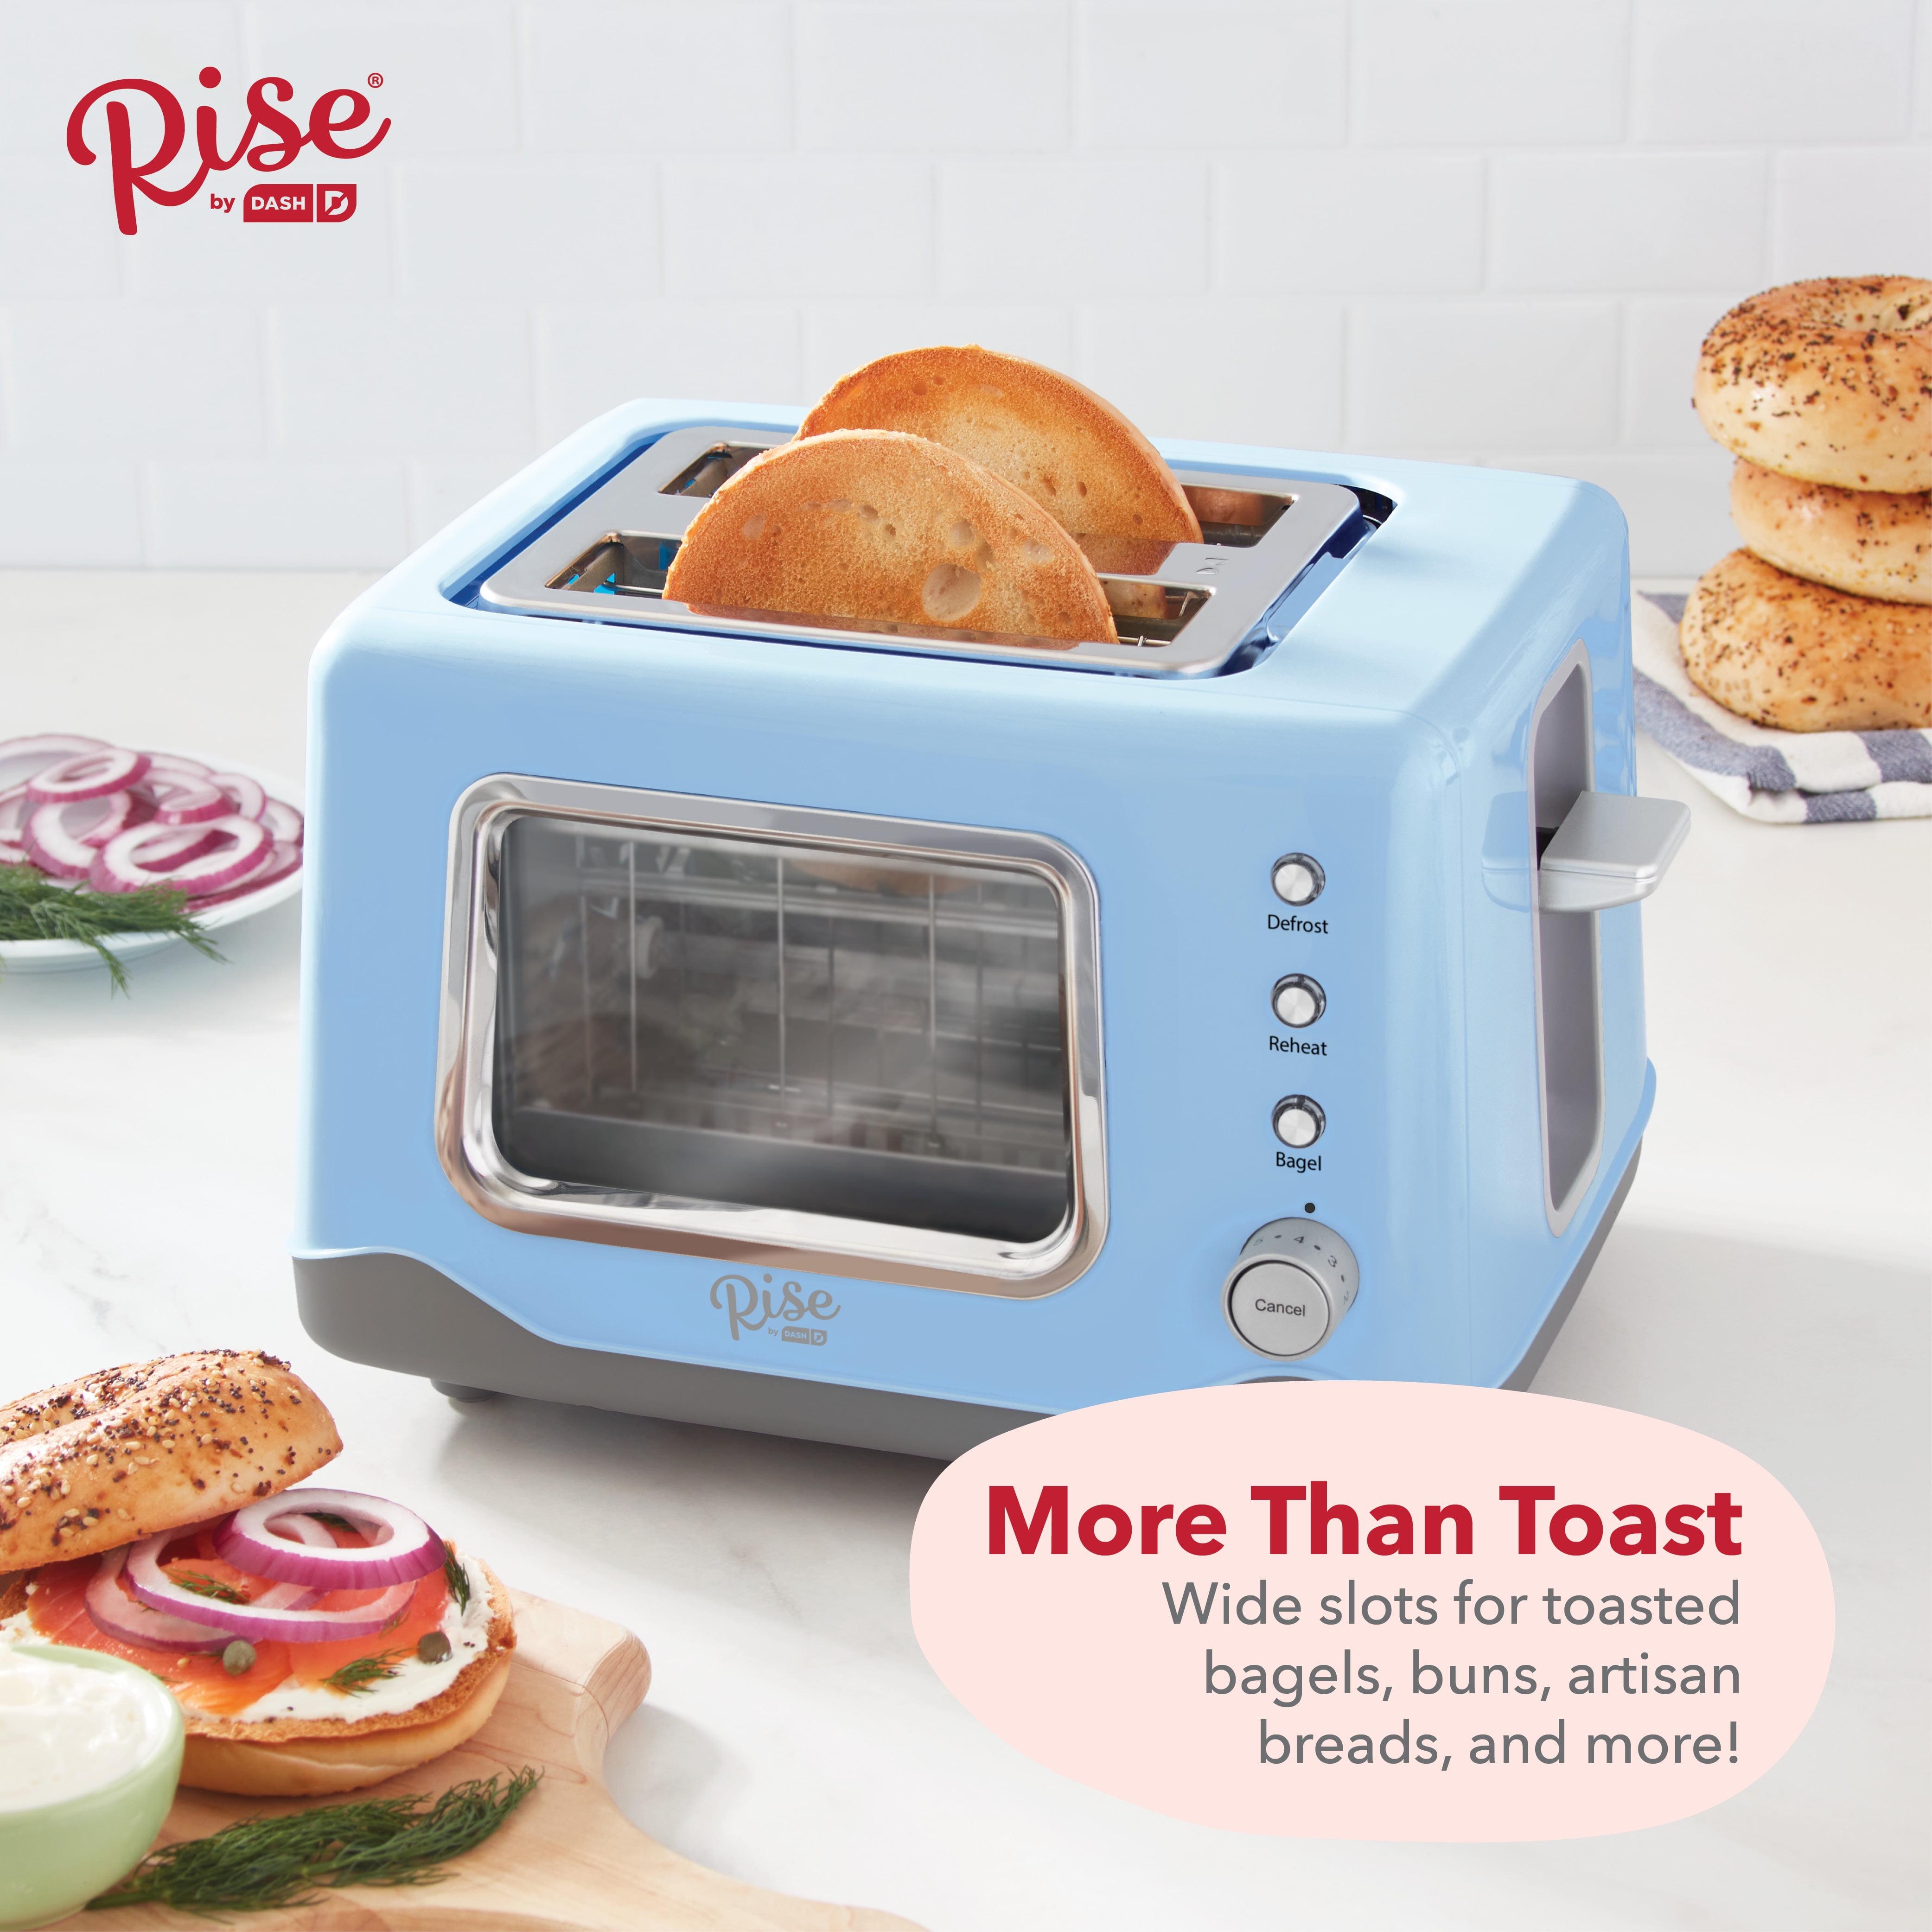 Rise by Dash RCVT200GBSK02 Clear View Window 2-Slice Toaster, Blue